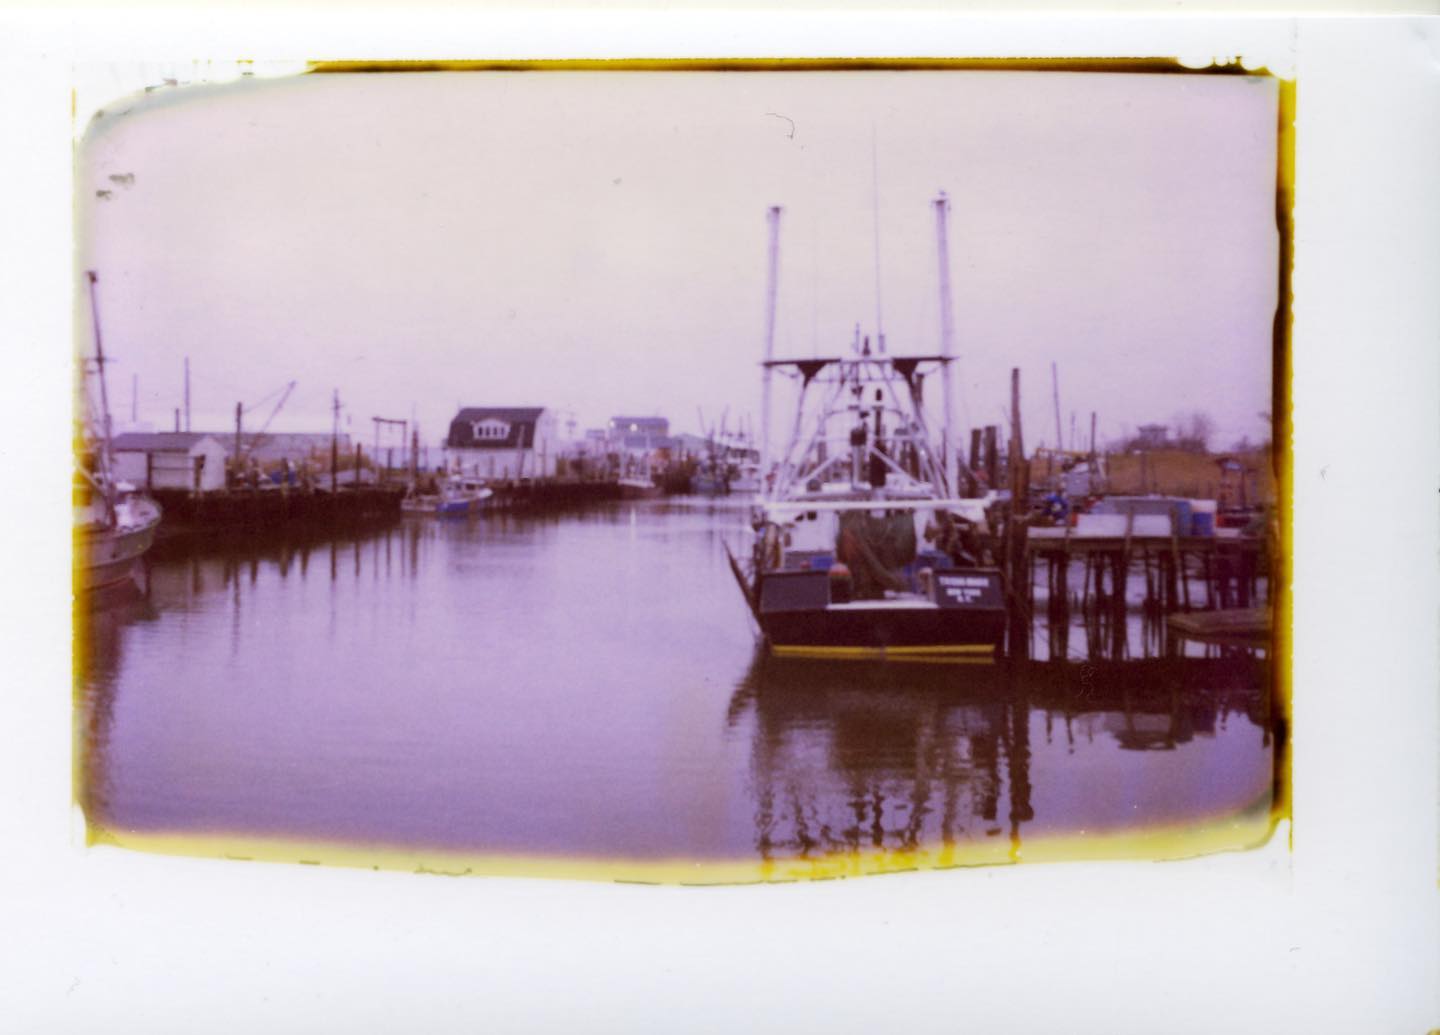 Tricia Marie

First reasonable shot on the new @supersense #oneinstantfilm that came today. Belford Harbor, not too far from my house, #polaroid195, developed for three minutes after I got home on this cold, blustery day. Looks like this shot had a tiny issue with a pod not popping, as the entire image didnât develop. Not surprised about that, as the pods are supplied by the 20x24 project and I saw the same kind of behavior with New55 when 20x24 supplies their pods. (@new55film makes their own pods now and seem to have solved this issue on their film.) All in all, Iâm delighted with how the film works. I look forward to trying it out in bright sunlight over the holidays instead of on the gloomy gray day we had here today. 
#film #filmphotography #filmphotographic #polaroid #oneinstant #packfilm #packfilmforever #savepackfilm